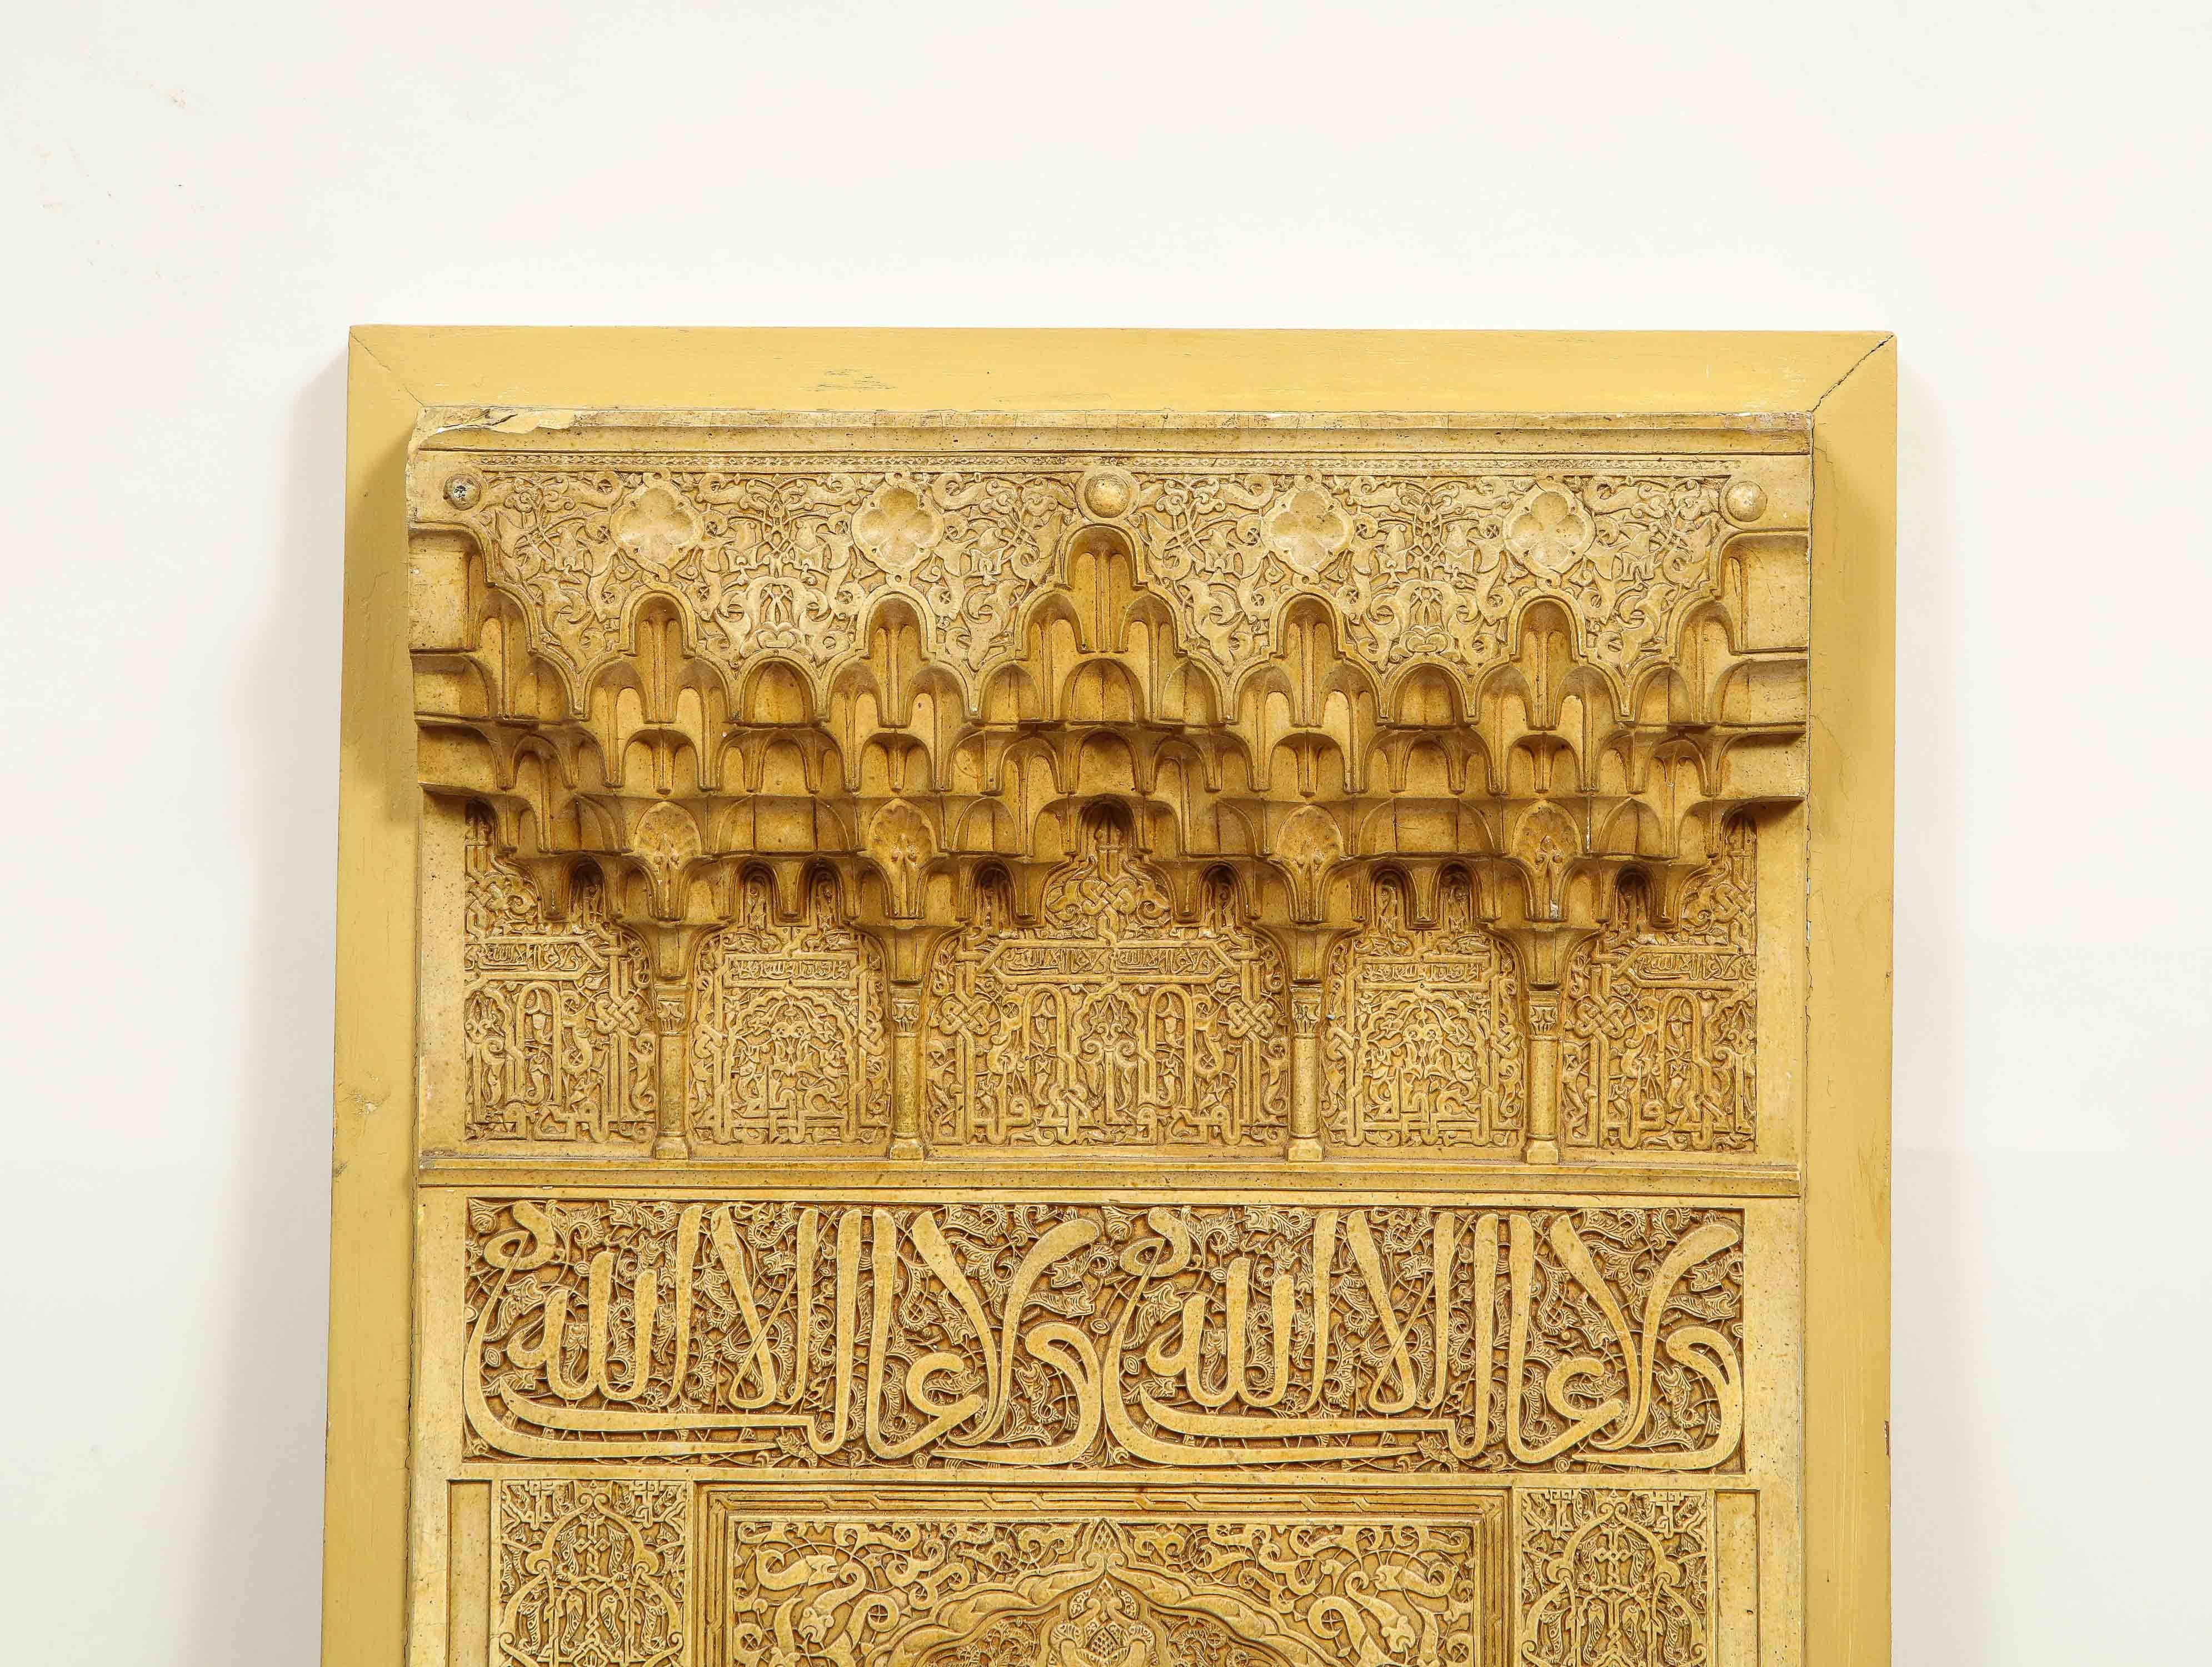 Rafael Contreras (Spanish, 1824 - 1890) Alhambra Architectural Model Plaque, 19th century.

A large and magnificent Hispano-Moresque Alhambra plaque by Rafael Contreras with Arabic calligraphy.

Colored plaster (original stucco, tiling and